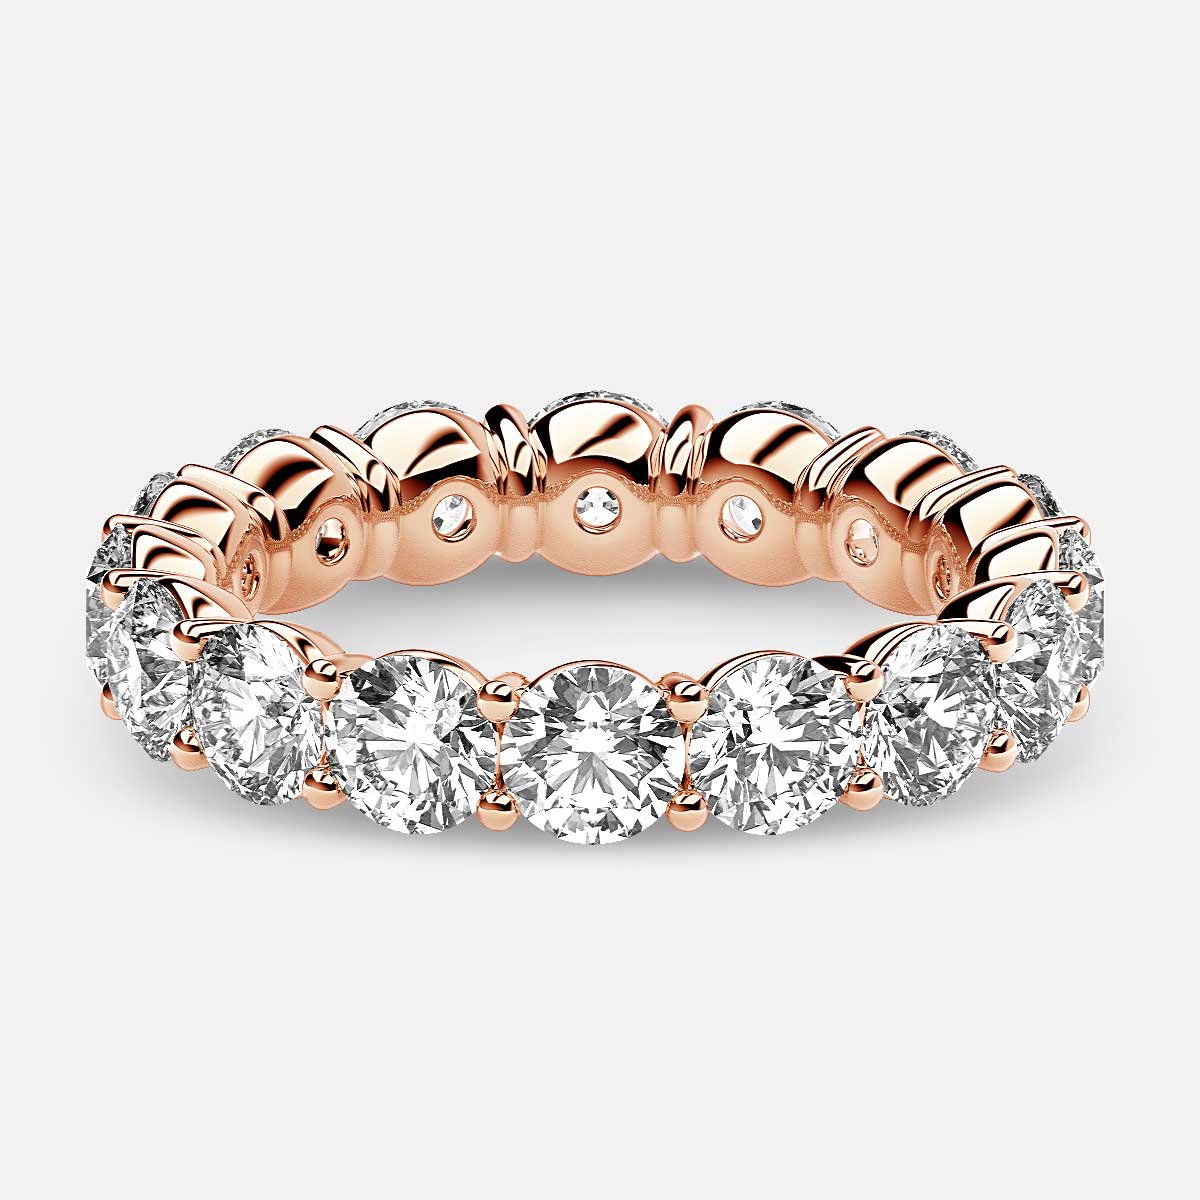 Classic Prong Set Eternity Ring with Round Diamonds in 18k Rose Gold